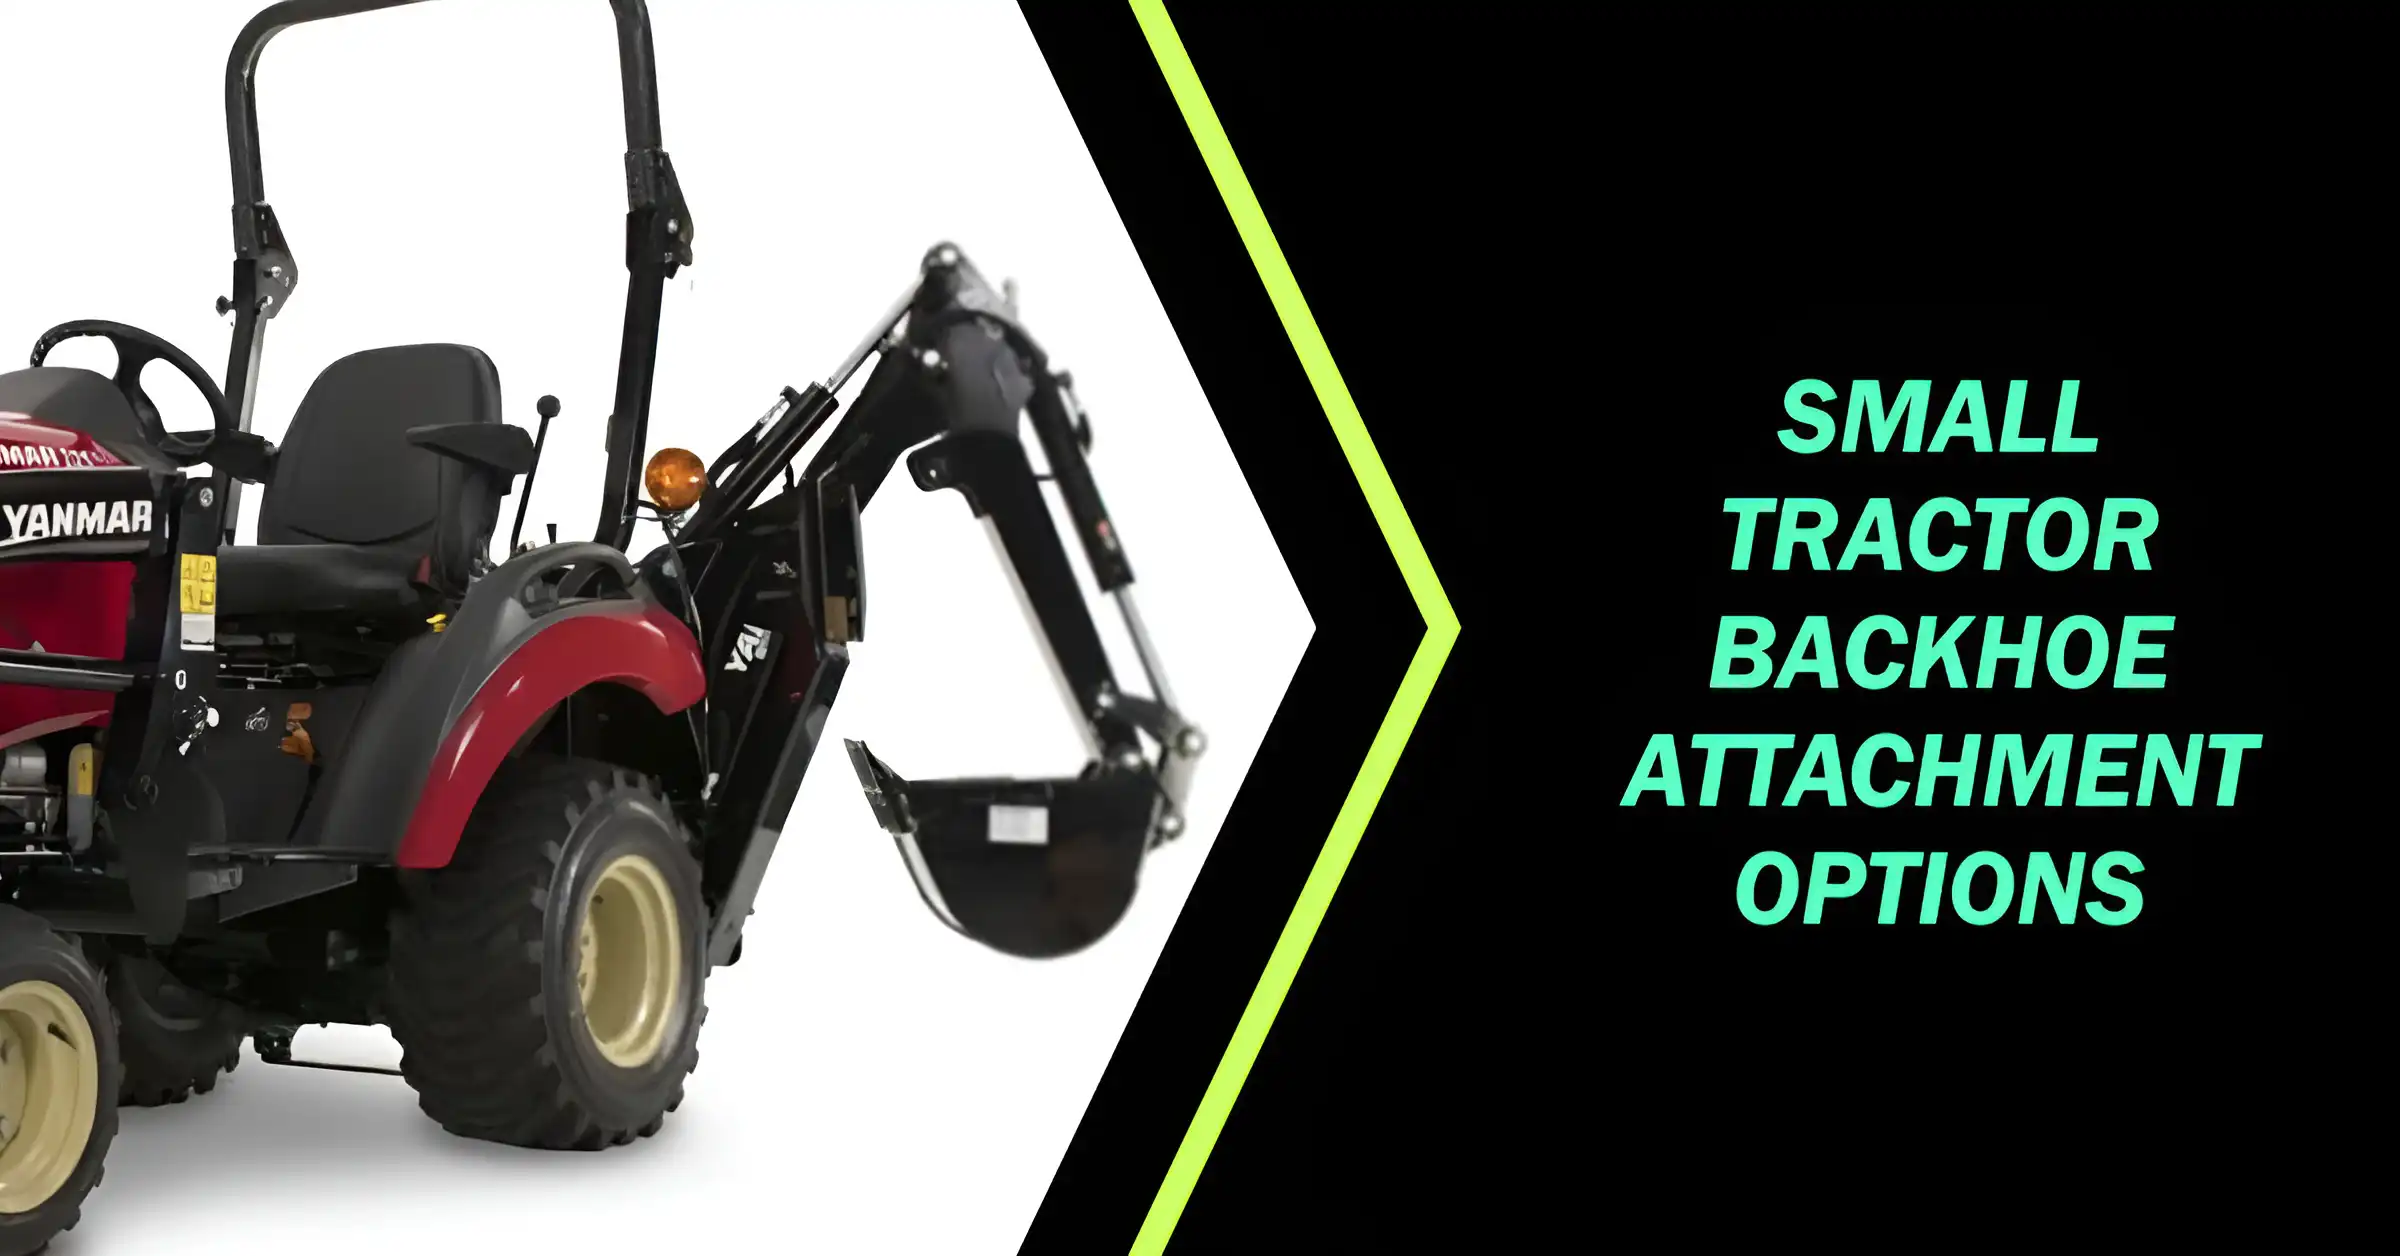 Enhance Your Landscaping with Kubota Brush Hog Tractor Attachments